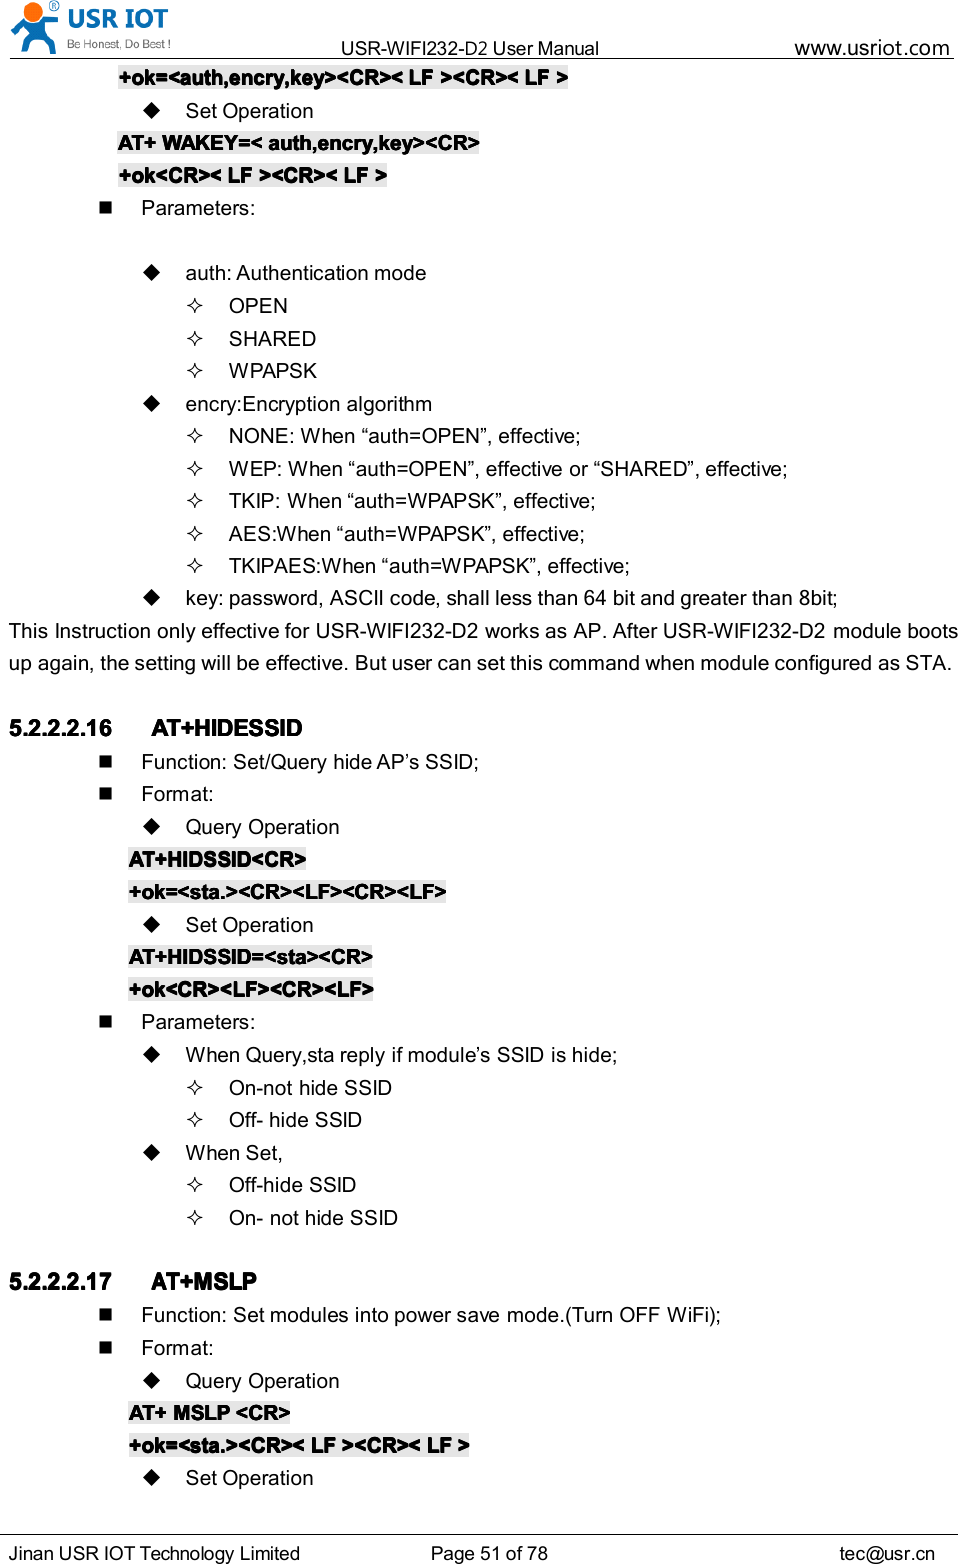 USR-WIFI232- D2 User Manual www.usr iot .comJinan USR IOT Technology Limited Page 51 of 78 tec@usr.cn+ok=&lt;auth,encry,key&gt;&lt;CR&gt;&lt;+ok=&lt;auth,encry,key&gt;&lt;CR&gt;&lt;+ok=&lt;auth,encry,key&gt;&lt;CR&gt;&lt;+ok=&lt;auth,encry,key&gt;&lt;CR&gt;&lt; LFLFLFLF &gt;&lt;CR&gt;&lt;&gt;&lt;CR&gt;&lt;&gt;&lt;CR&gt;&lt;&gt;&lt;CR&gt;&lt; LFLFLFLF &gt;&gt;&gt;&gt;Set OperationAT+AT+AT+AT+ WAKEY=&lt;WAKEY=&lt;WAKEY=&lt;WAKEY=&lt; auth,encry,key&gt;&lt;CR&gt;auth,encry,key&gt;&lt;CR&gt;auth,encry,key&gt;&lt;CR&gt;auth,encry,key&gt;&lt;CR&gt;+ok&lt;CR&gt;&lt;+ok&lt;CR&gt;&lt;+ok&lt;CR&gt;&lt;+ok&lt;CR&gt;&lt; LFLFLFLF &gt;&lt;CR&gt;&lt;&gt;&lt;CR&gt;&lt;&gt;&lt;CR&gt;&lt;&gt;&lt;CR&gt;&lt; LFLFLFLF &gt;&gt;&gt;&gt;Parameters:auth: Authentication modeOPENSHAREDWPAPSKencry:Encryption algorithmNONE: When “ auth=OPEN ” , effective;WEP: When “ auth=OPEN ” , effective or “ SHARED ” , effective;TKIP: When “ auth=WPAPSK ” , effective;AES:When “ auth=WPAPSK ” , effective;TKIPAES:When “ auth=WPAPSK ” , effective;key: password, ASCII code, shall less than 64 bit and greater than 8bit;This Instruction only effective for USR-WIFI232-D2 works as AP. After USR-WIFI232-D2 module bootsup again, the setting will be effective. But user can set this command when module configured as STA.5.2.2.2.165.2.2.2.165.2.2.2.165.2.2.2.16 AT+HIDESSIDAT+HIDESSIDAT+HIDESSIDAT+HIDESSIDFunction: Set/Query hide AP’s SSID;Format:Query OperationAT+HIDSSID&lt;CR&gt;AT+HIDSSID&lt;CR&gt;AT+HIDSSID&lt;CR&gt;AT+HIDSSID&lt;CR&gt;+ok=&lt;sta.&gt;&lt;CR&gt;&lt;LF&gt;&lt;CR&gt;&lt;LF&gt;+ok=&lt;sta.&gt;&lt;CR&gt;&lt;LF&gt;&lt;CR&gt;&lt;LF&gt;+ok=&lt;sta.&gt;&lt;CR&gt;&lt;LF&gt;&lt;CR&gt;&lt;LF&gt;+ok=&lt;sta.&gt;&lt;CR&gt;&lt;LF&gt;&lt;CR&gt;&lt;LF&gt;Set OperationAT+HIDSSID=&lt;sta&gt;&lt;CR&gt;AT+HIDSSID=&lt;sta&gt;&lt;CR&gt;AT+HIDSSID=&lt;sta&gt;&lt;CR&gt;AT+HIDSSID=&lt;sta&gt;&lt;CR&gt;+ok&lt;CR&gt;&lt;LF&gt;&lt;CR&gt;&lt;LF&gt;+ok&lt;CR&gt;&lt;LF&gt;&lt;CR&gt;&lt;LF&gt;+ok&lt;CR&gt;&lt;LF&gt;&lt;CR&gt;&lt;LF&gt;+ok&lt;CR&gt;&lt;LF&gt;&lt;CR&gt;&lt;LF&gt;Parameters:When Query,sta reply if module ’ s SSID is hide;On-not hide SSIDOff- hide SSIDWhen Set,Off-hide SSIDOn- not hide SSID5.2.2.2.175.2.2.2.175.2.2.2.175.2.2.2.17AAAAT+MSLPT+MSLPT+MSLPT+MSLPFunction: Set modules into power save mode.(Turn OFF WiFi);Format:Query OperationAT+AT+AT+AT+ MSLPMSLPMSLPMSLP &lt;CR&gt;&lt;CR&gt;&lt;CR&gt;&lt;CR&gt;+ok=&lt;sta.&gt;&lt;CR&gt;&lt;+ok=&lt;sta.&gt;&lt;CR&gt;&lt;+ok=&lt;sta.&gt;&lt;CR&gt;&lt;+ok=&lt;sta.&gt;&lt;CR&gt;&lt; LFLFLFLF &gt;&lt;CR&gt;&lt;&gt;&lt;CR&gt;&lt;&gt;&lt;CR&gt;&lt;&gt;&lt;CR&gt;&lt; LFLFLFLF &gt;&gt;&gt;&gt;Set Operation